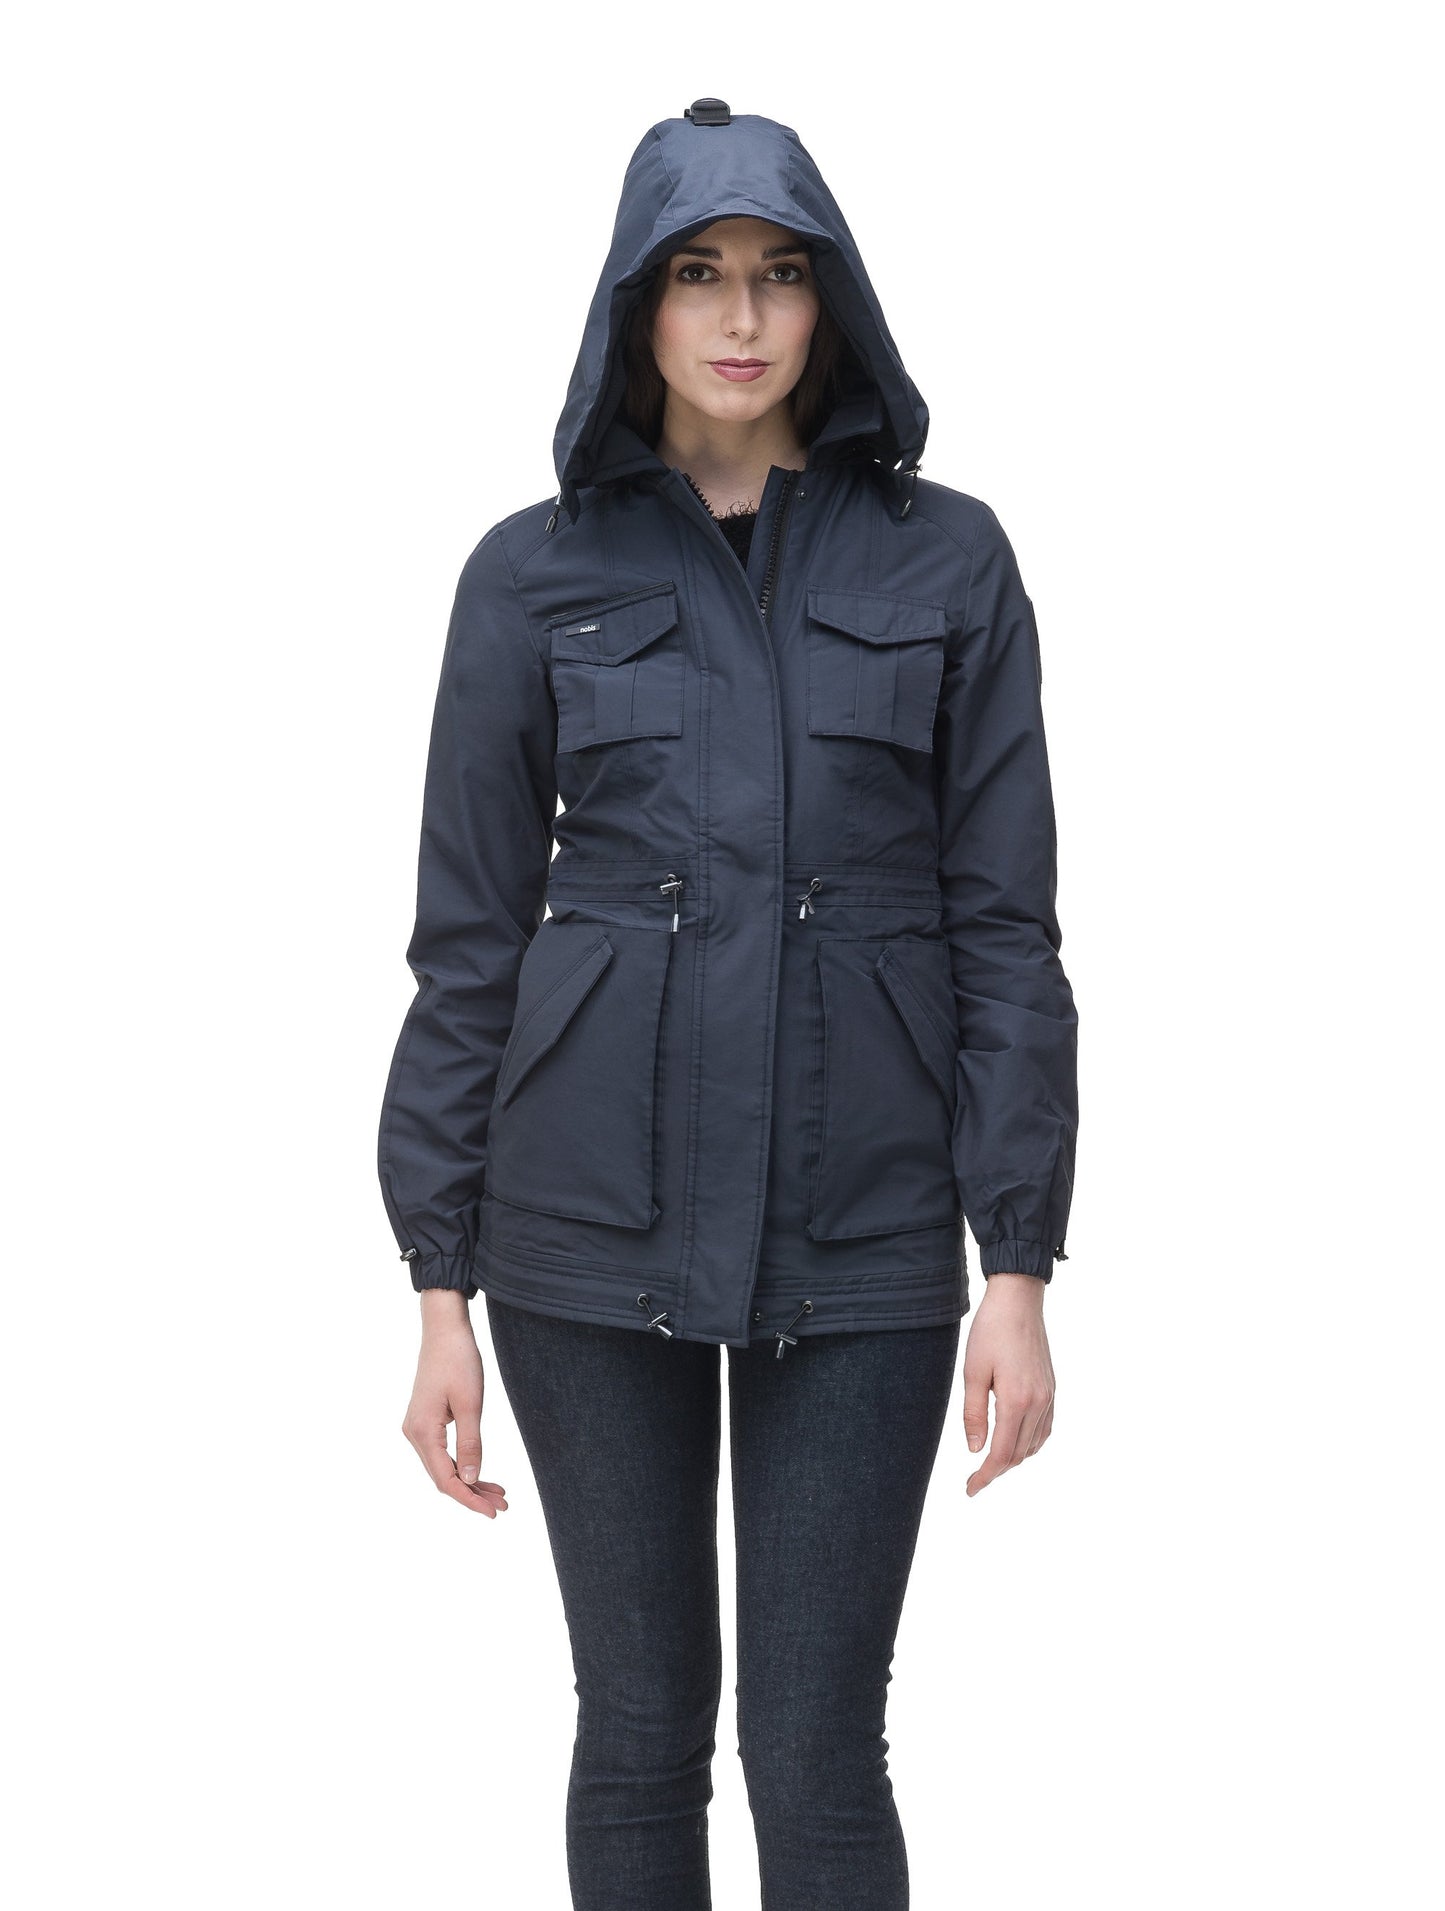 Women's hooded shirt jacket with four front pockets and adjustable waist in Navy